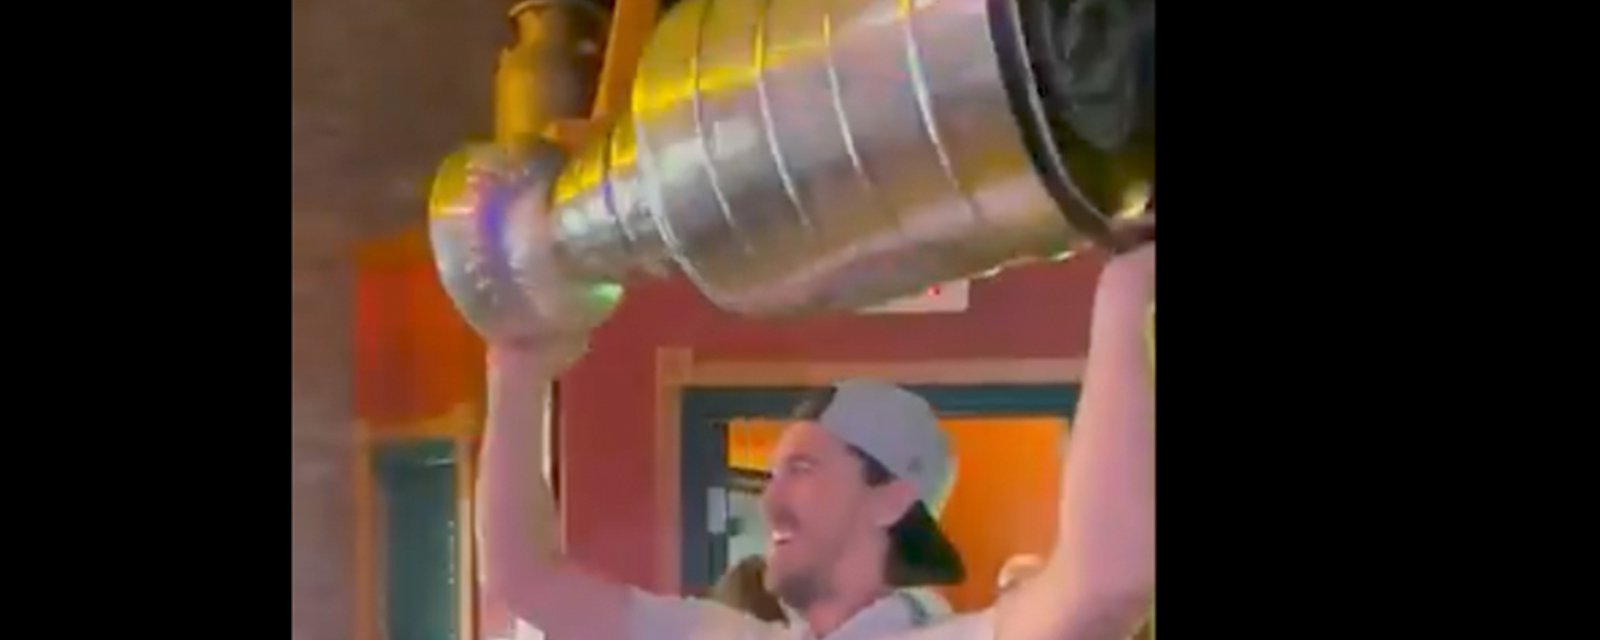 Ryan McDonaugh celebrates Stanley Cup victory with an entrance fit for a king [VIDEO]